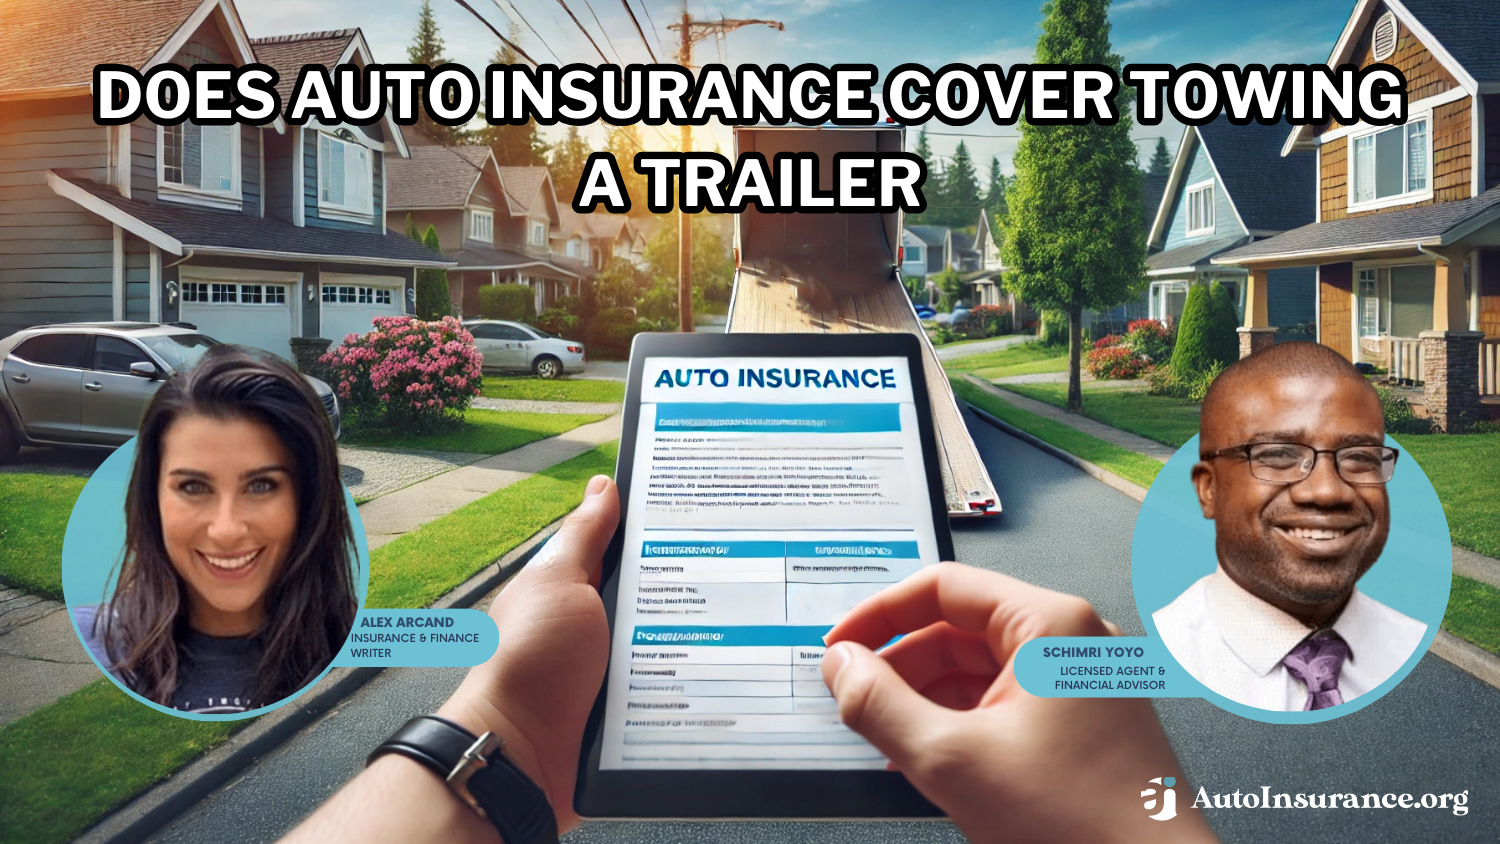 Does auto insurance cover towing a trailer?